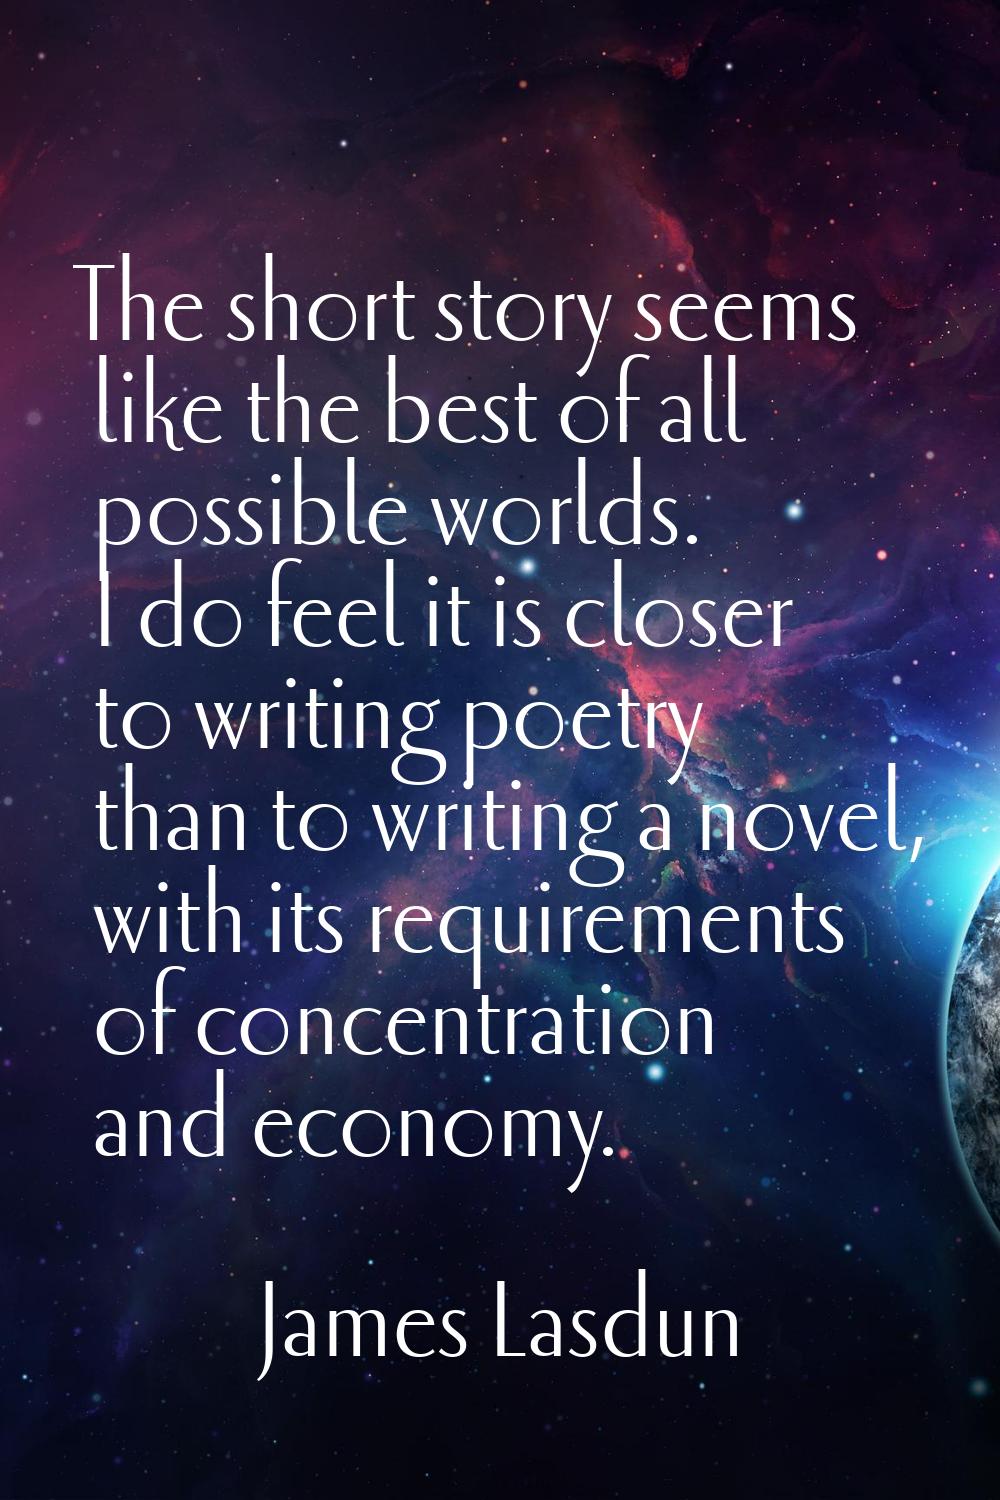 The short story seems like the best of all possible worlds. I do feel it is closer to writing poetr